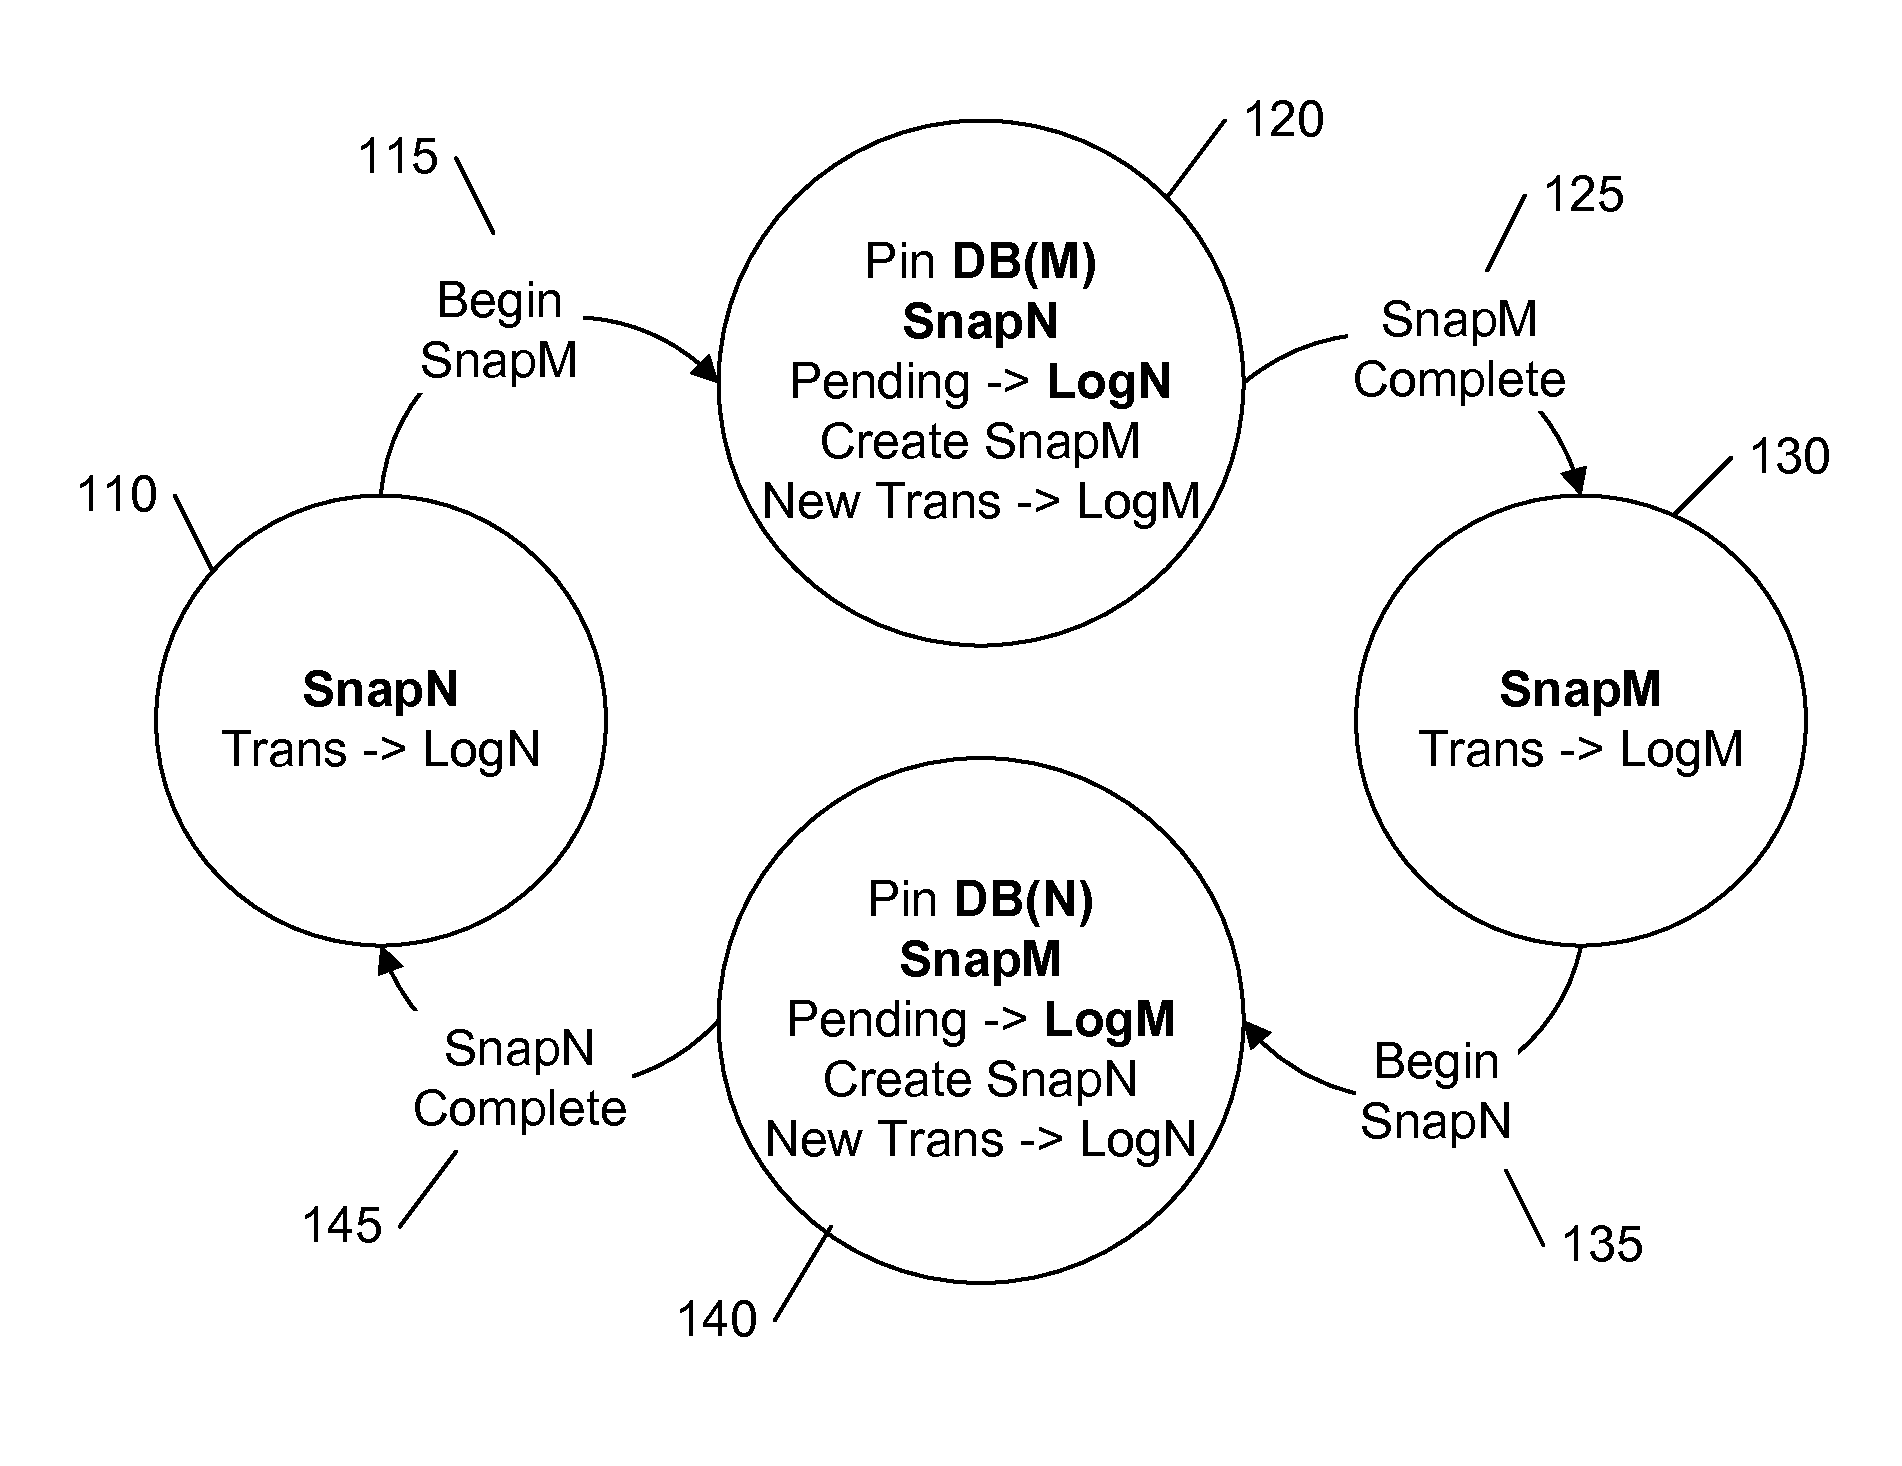 Durability implementation plan in an in-memory database system